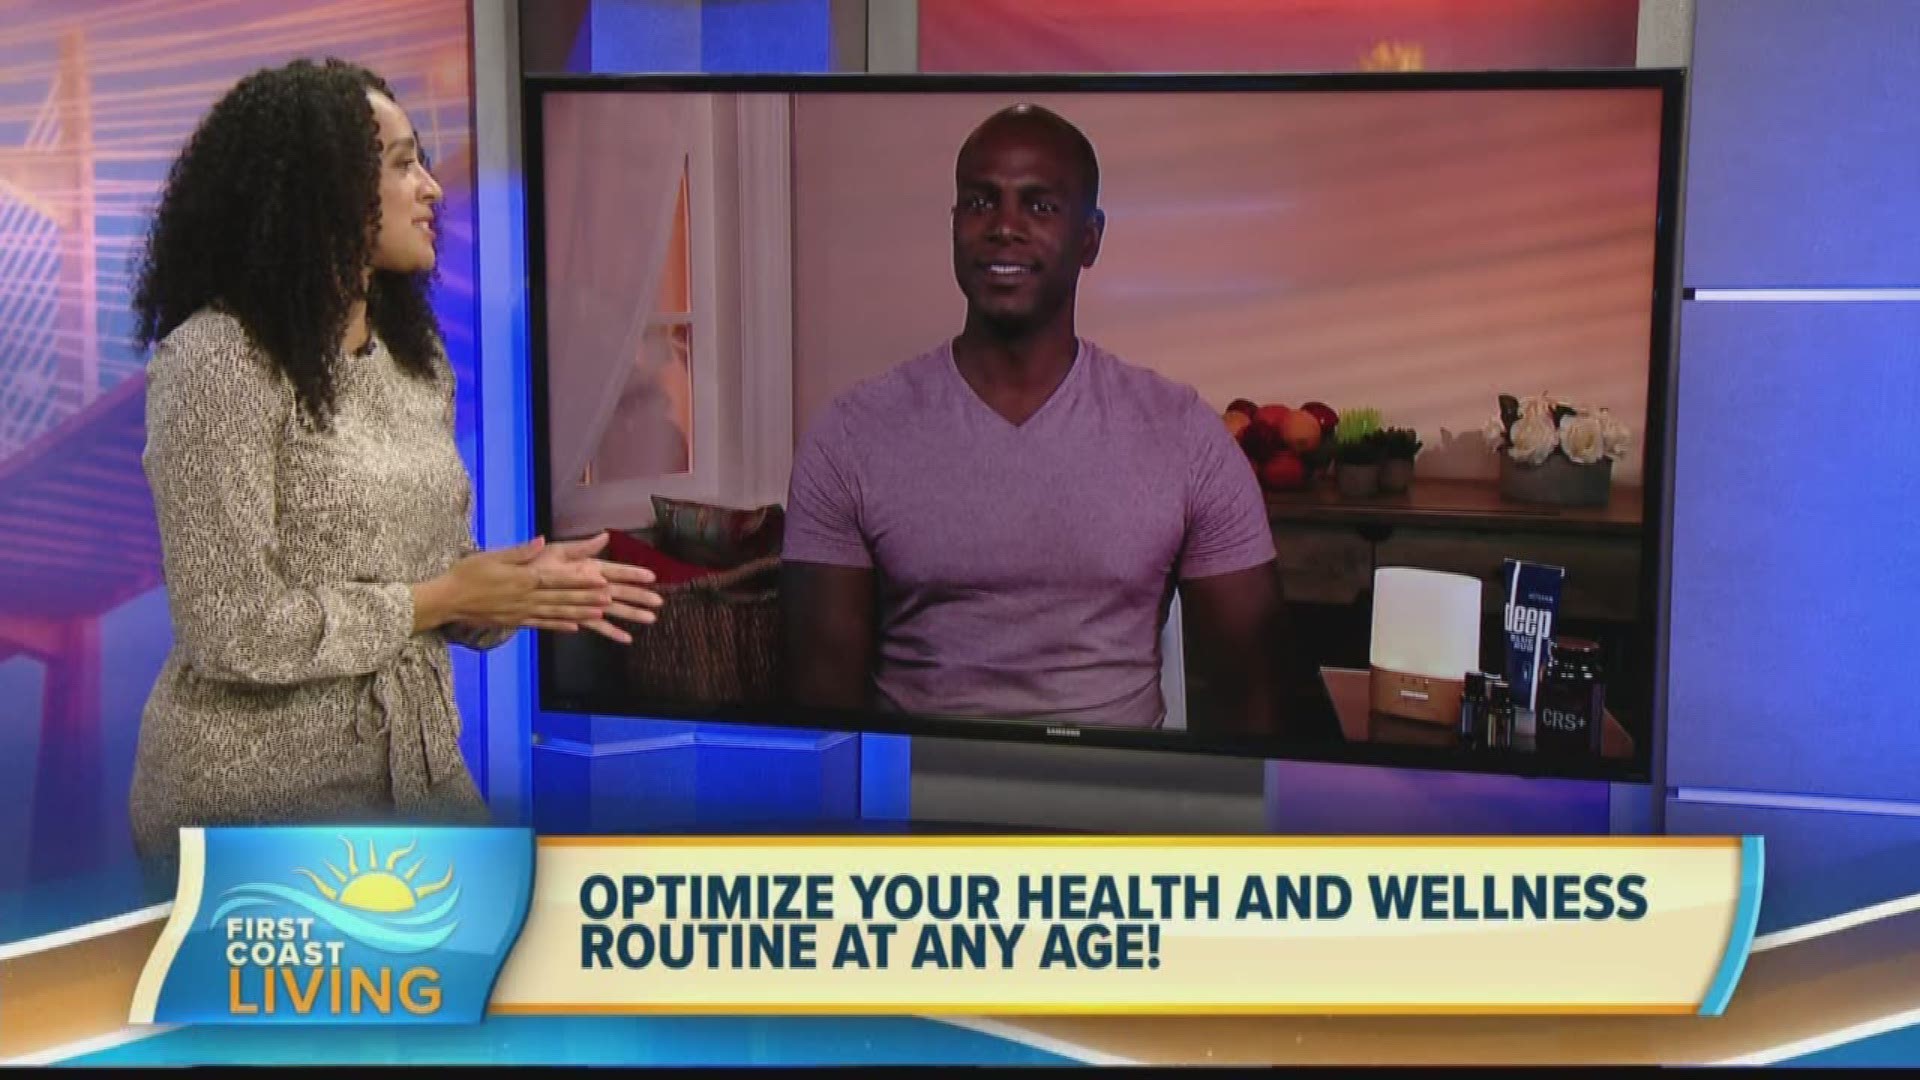 A health and wellness expert shares tips on how we can optimize our health at any age!